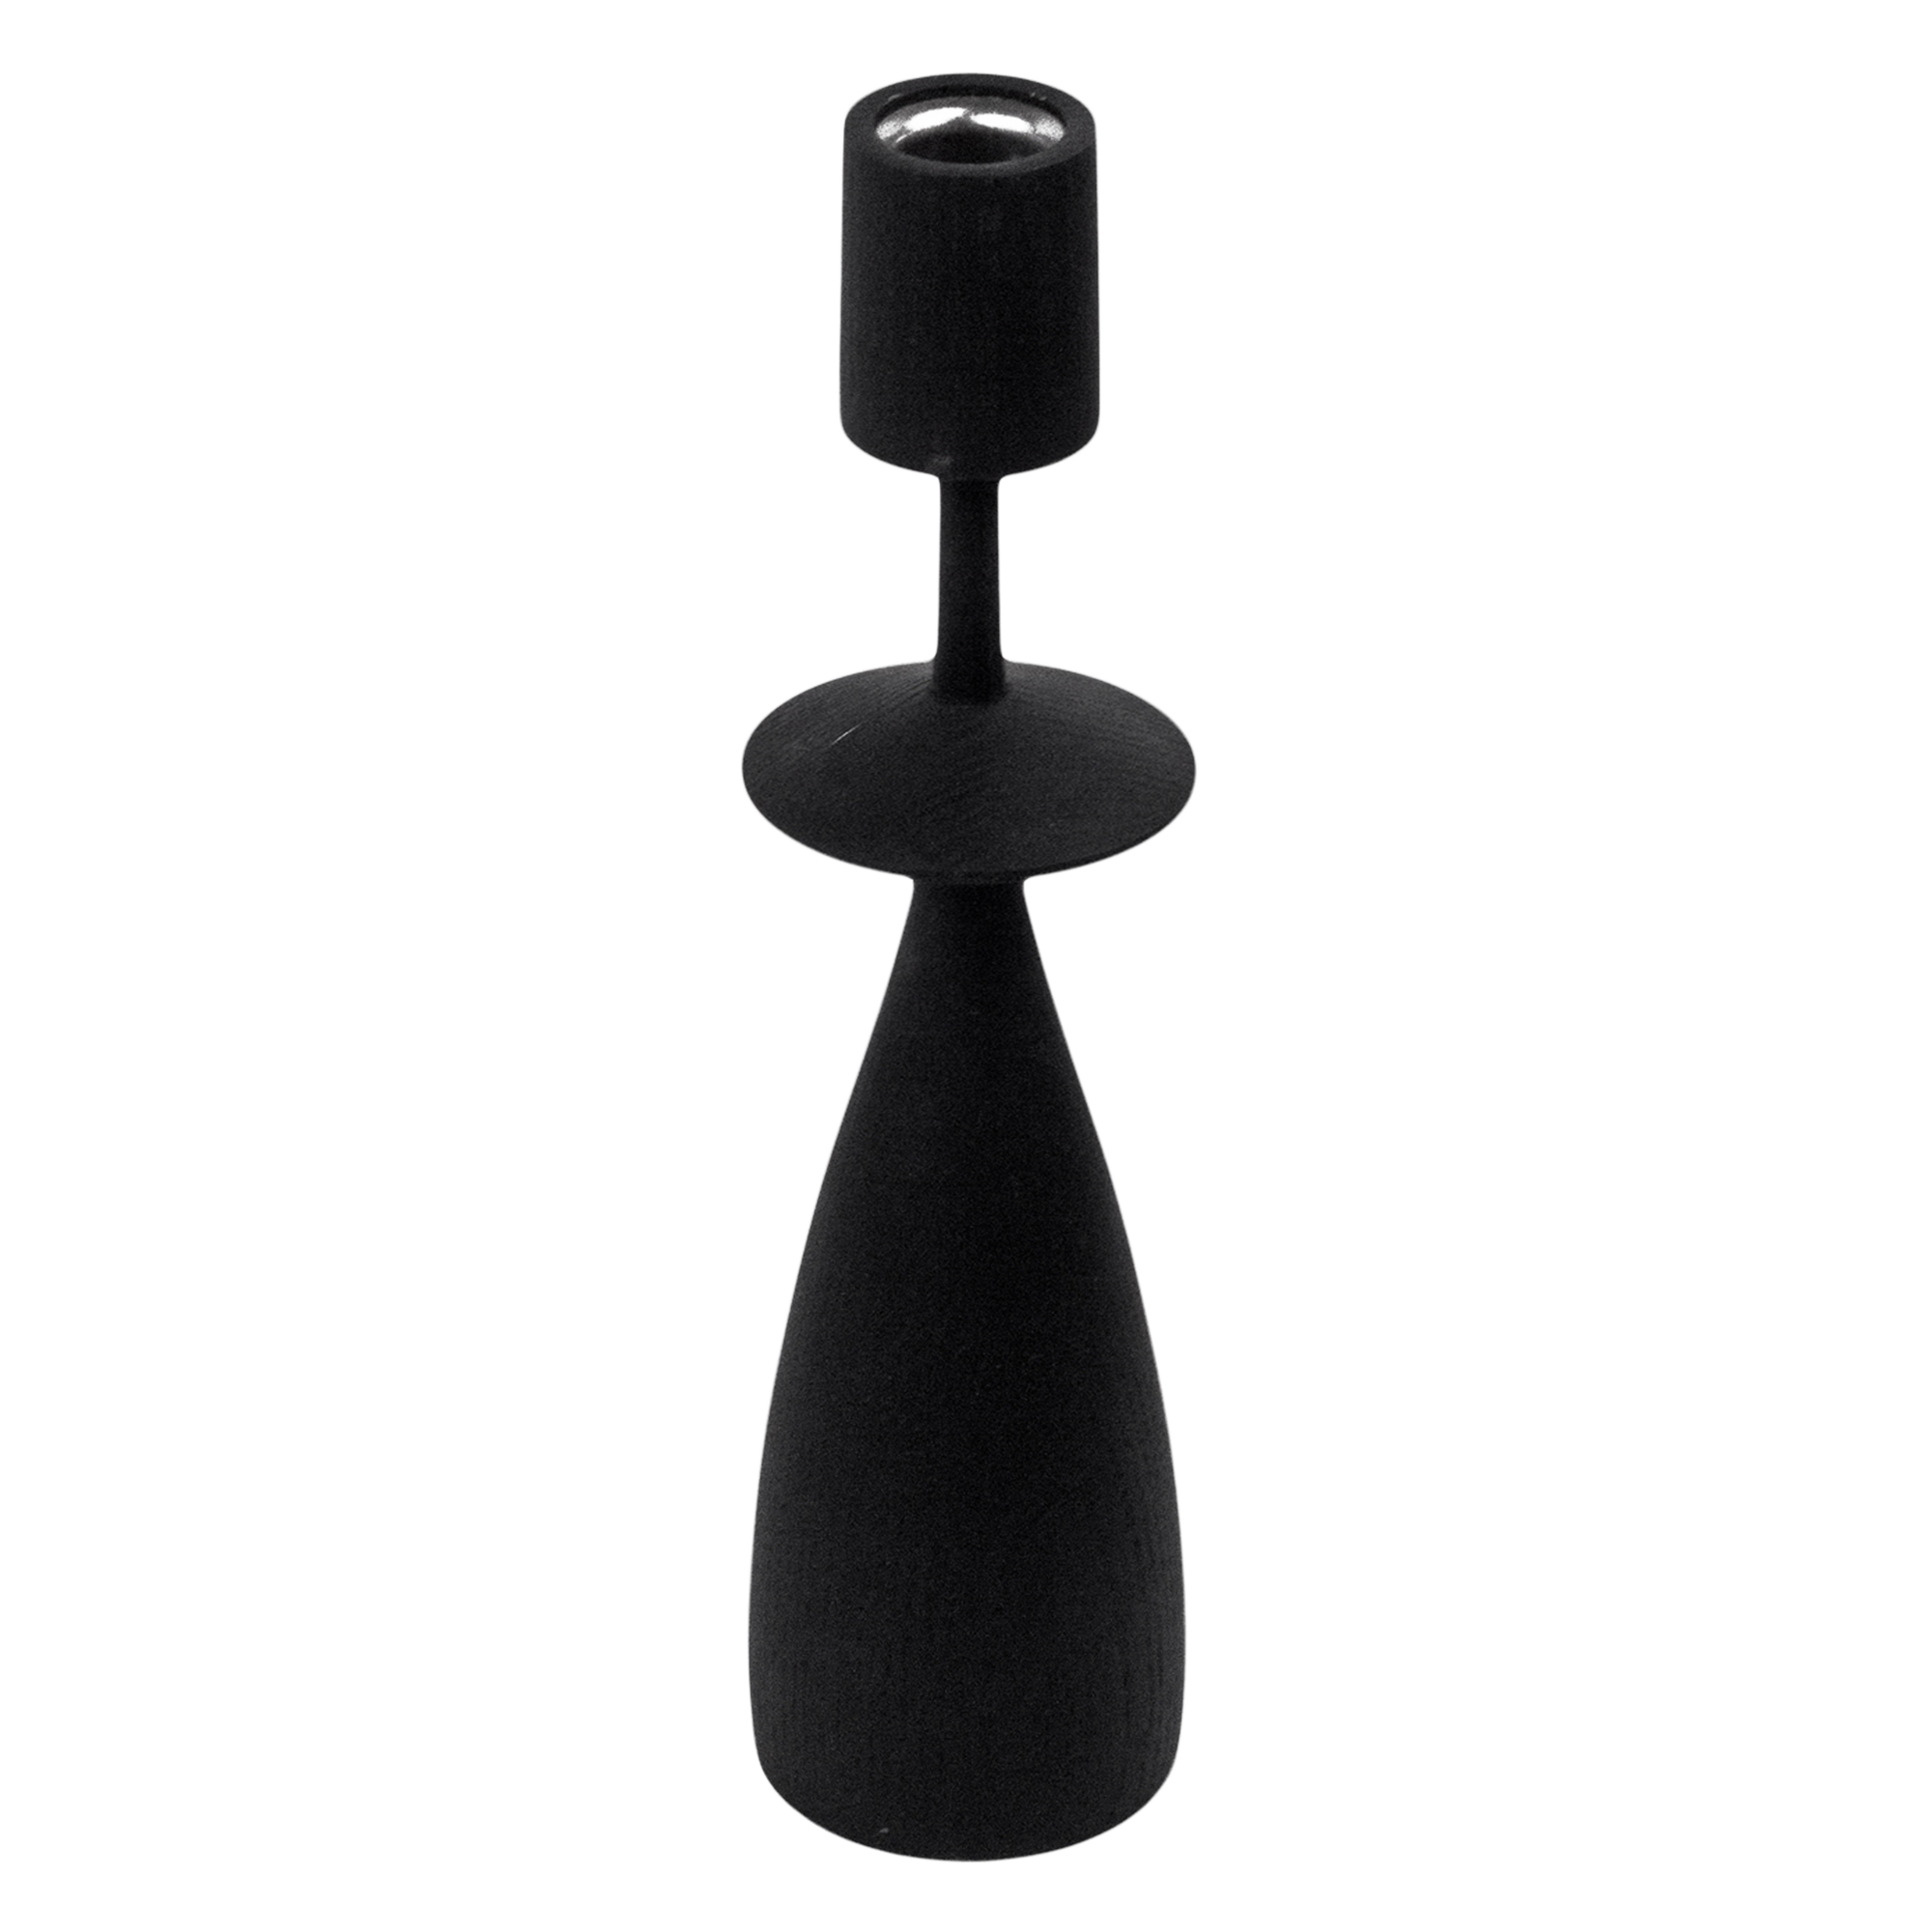 Crafted from ebonized ash wood, the Astrid candleholder features clean geometric lines that echo mid-century modern style.